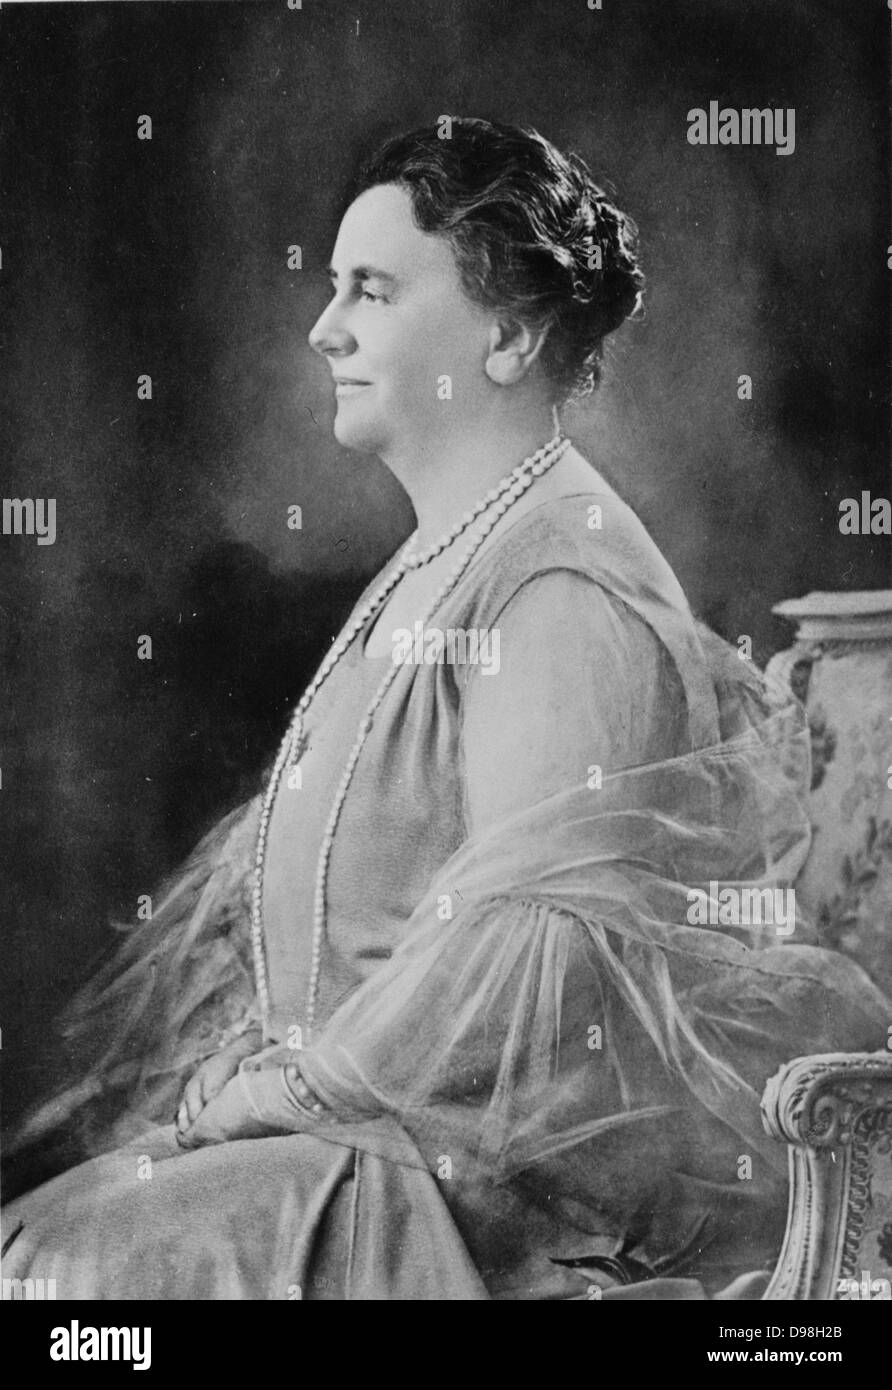 Wilhelmina  31 August 1880 - 28 November 1962) was Queen regnant of the Kingdom of the Netherlands from 1890 to 1948. She ruled the Netherlands for fifty-eight years, longer than any other Dutch monarch. Her reign saw World War I and World War II Stock Photo